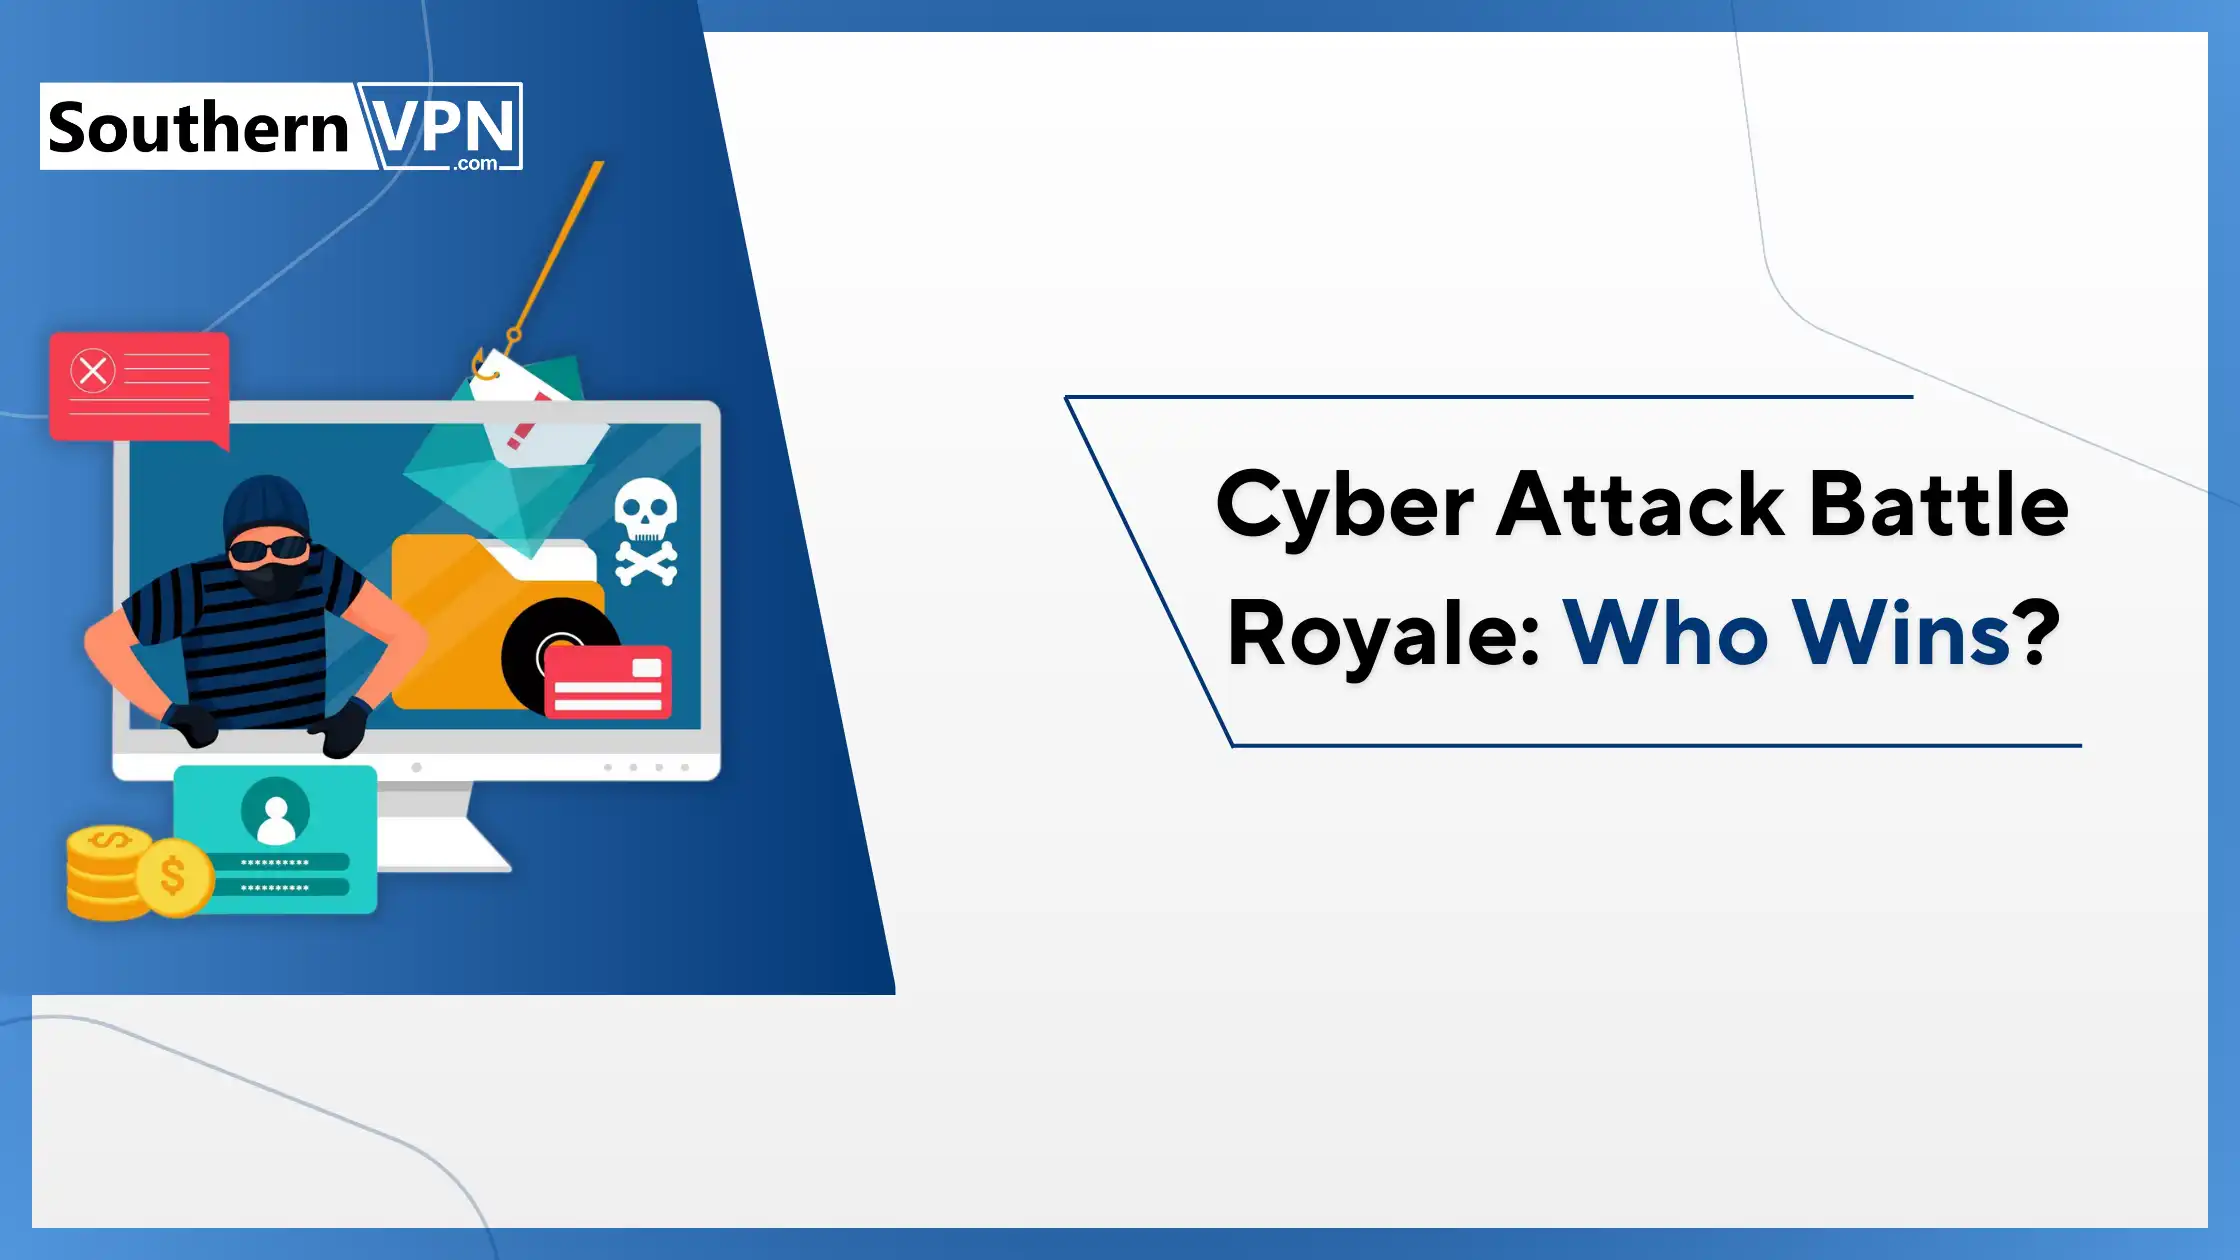 Illustration of a hacker, phishing attack, and security threats on a computer screen, representing cyber attack battle royale, highlighting types of cyber attacks.